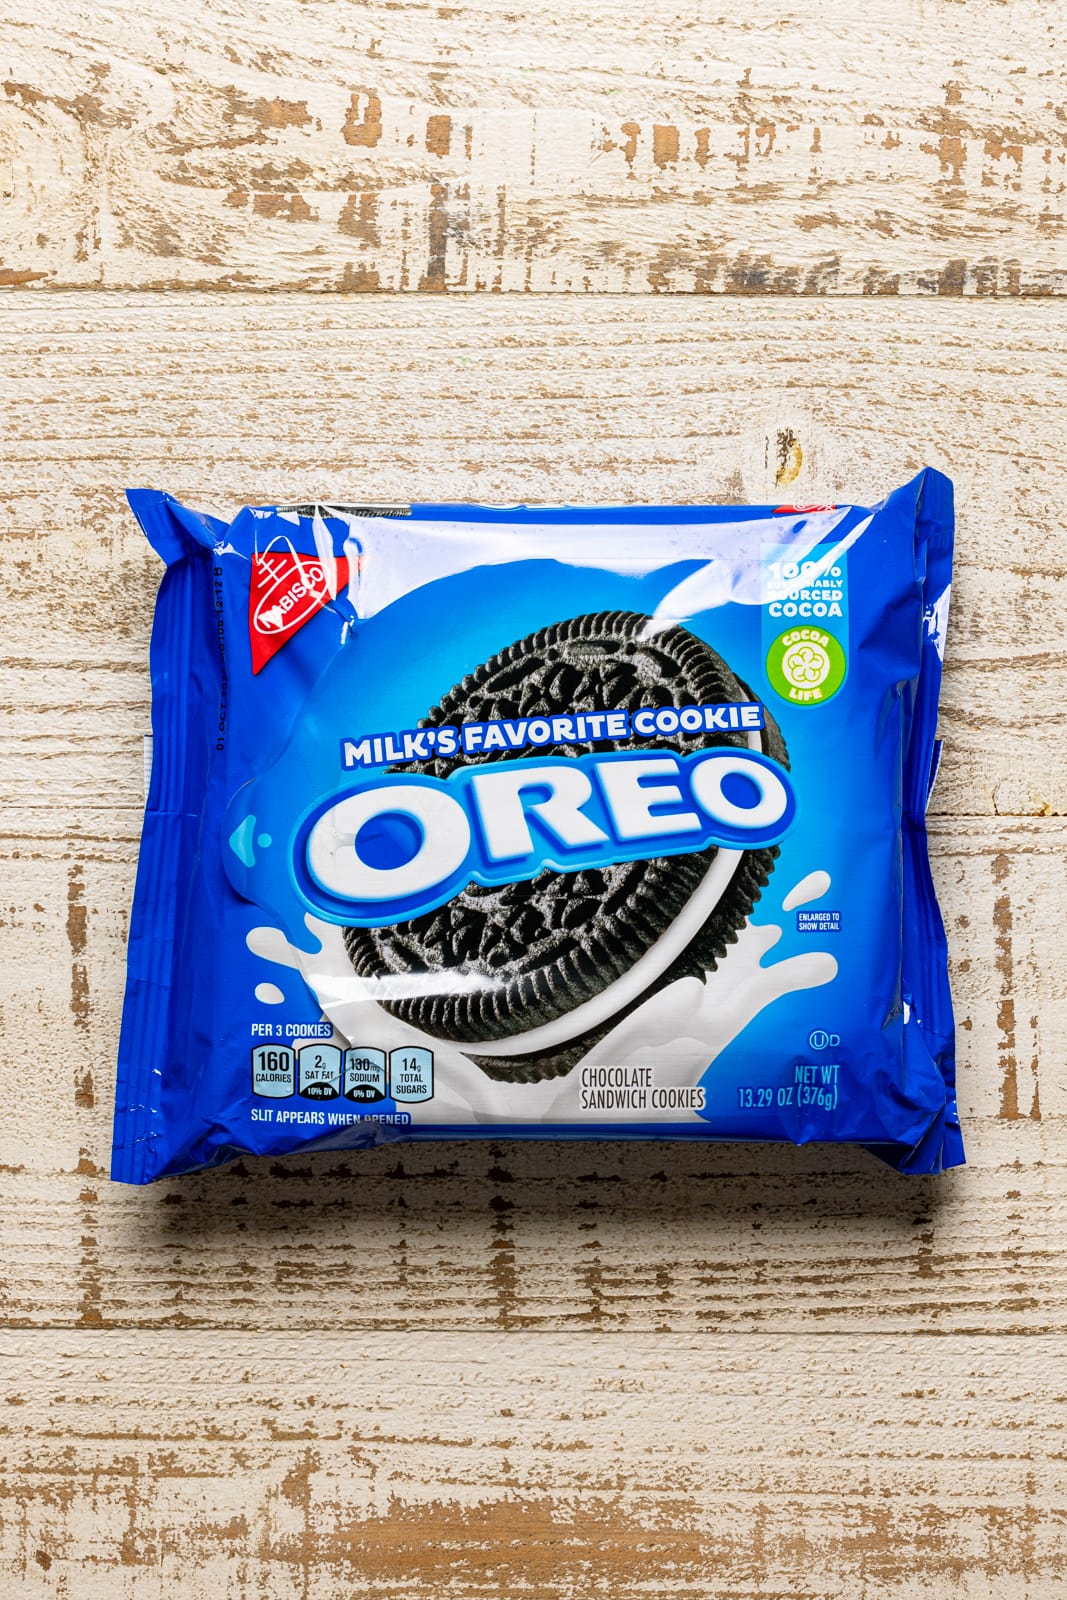 Pack of oreo cookies in a blue package on a white wood table.